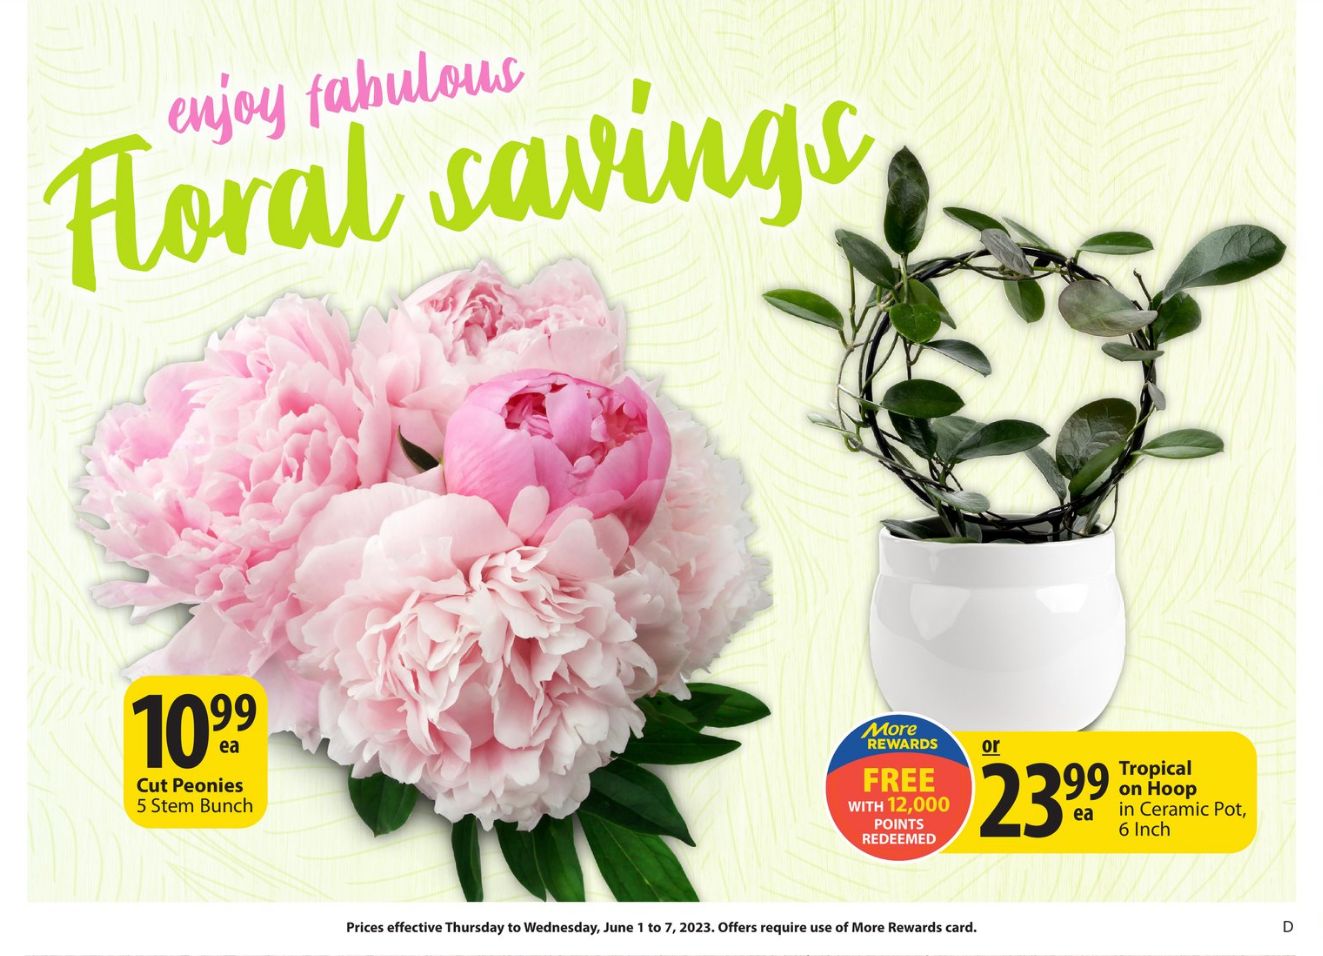 Circulaire Save-On-Foods 01.06.2023 - 07.06.2023